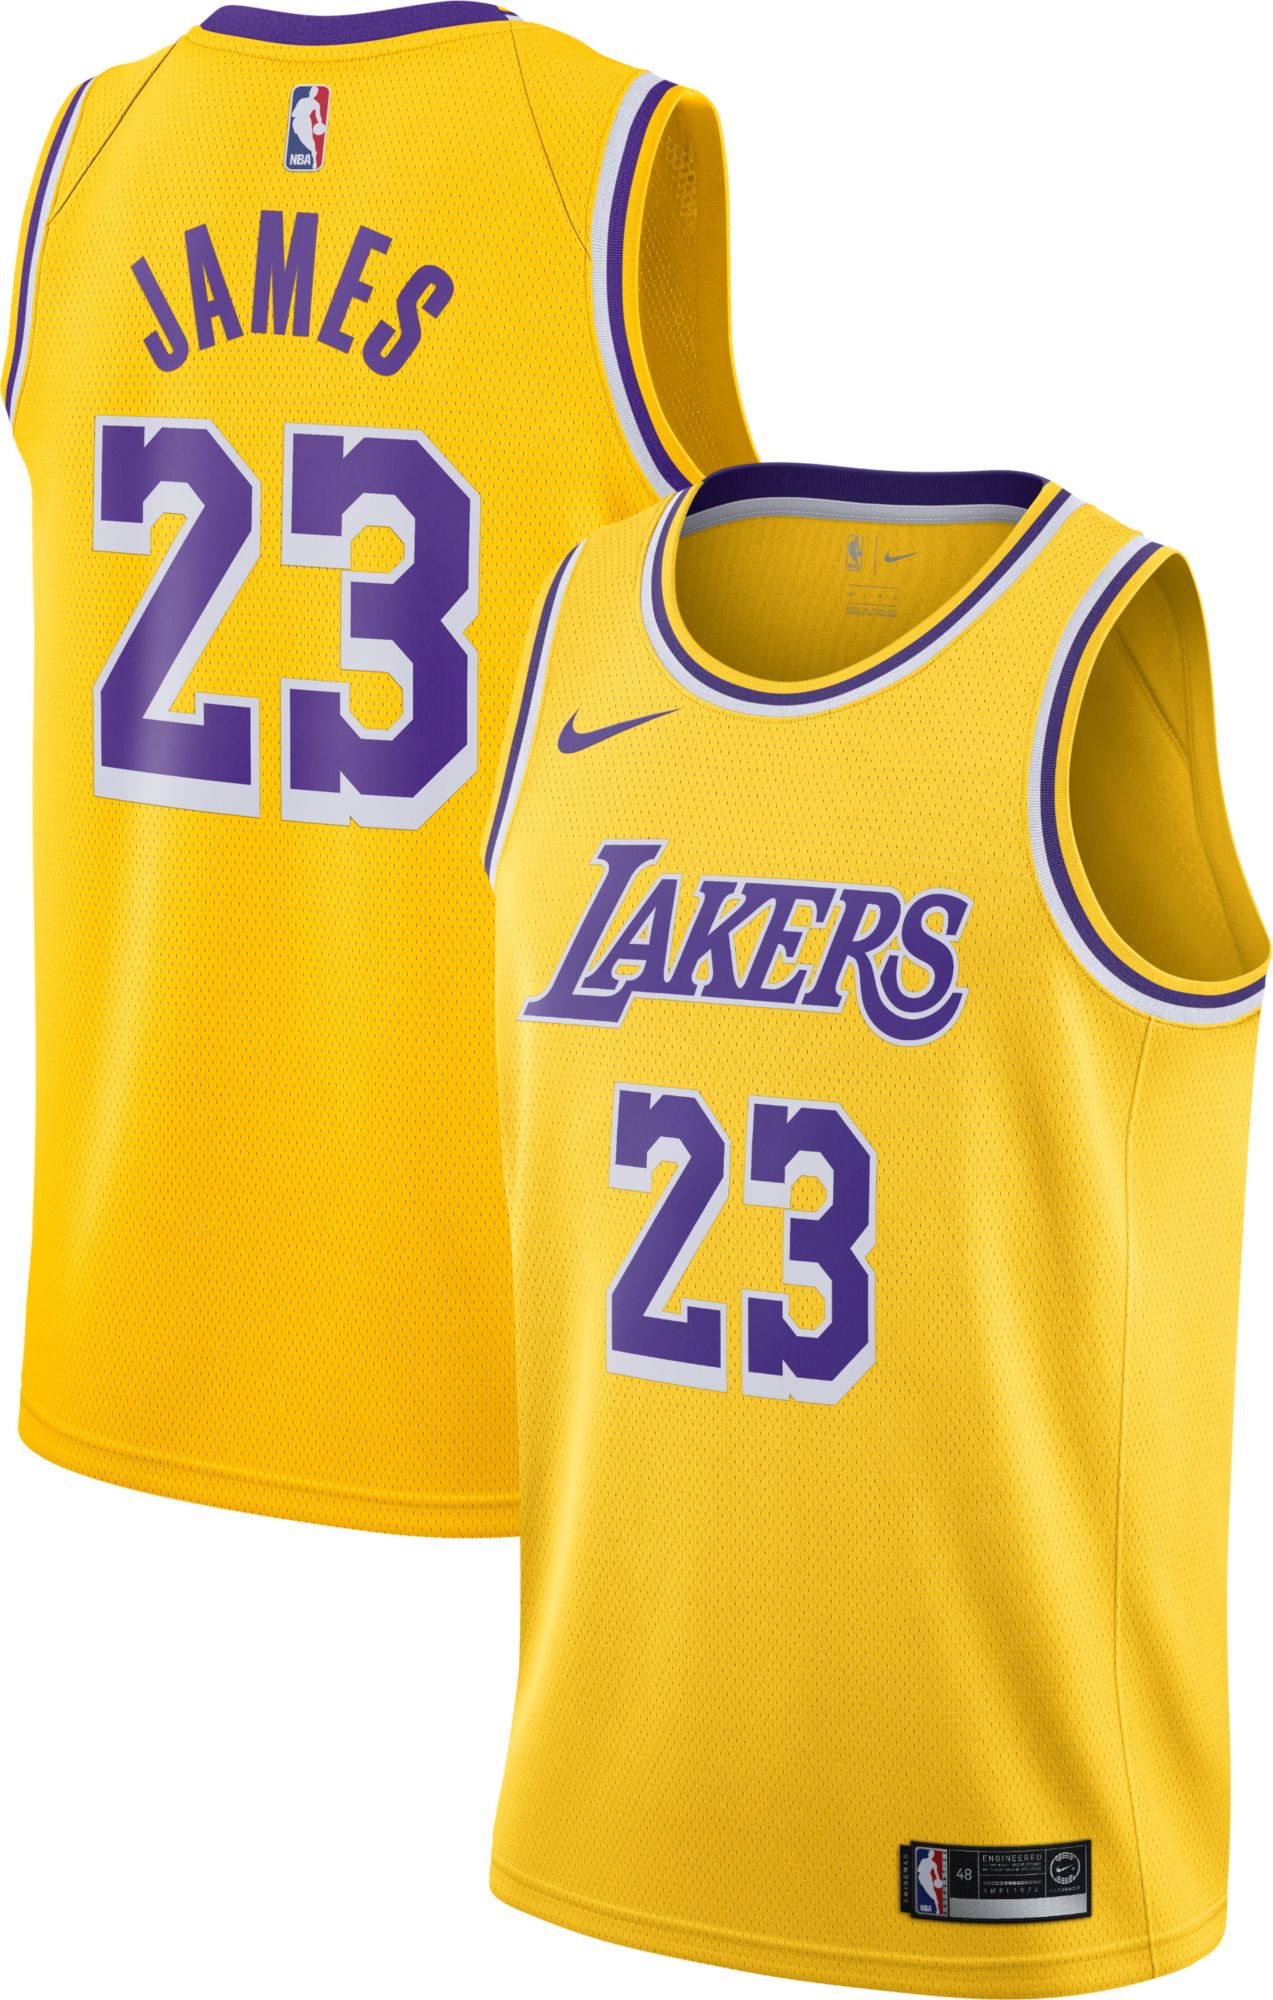 los angeles lakers baseball jersey Off 57% - www.bashhguidelines.org